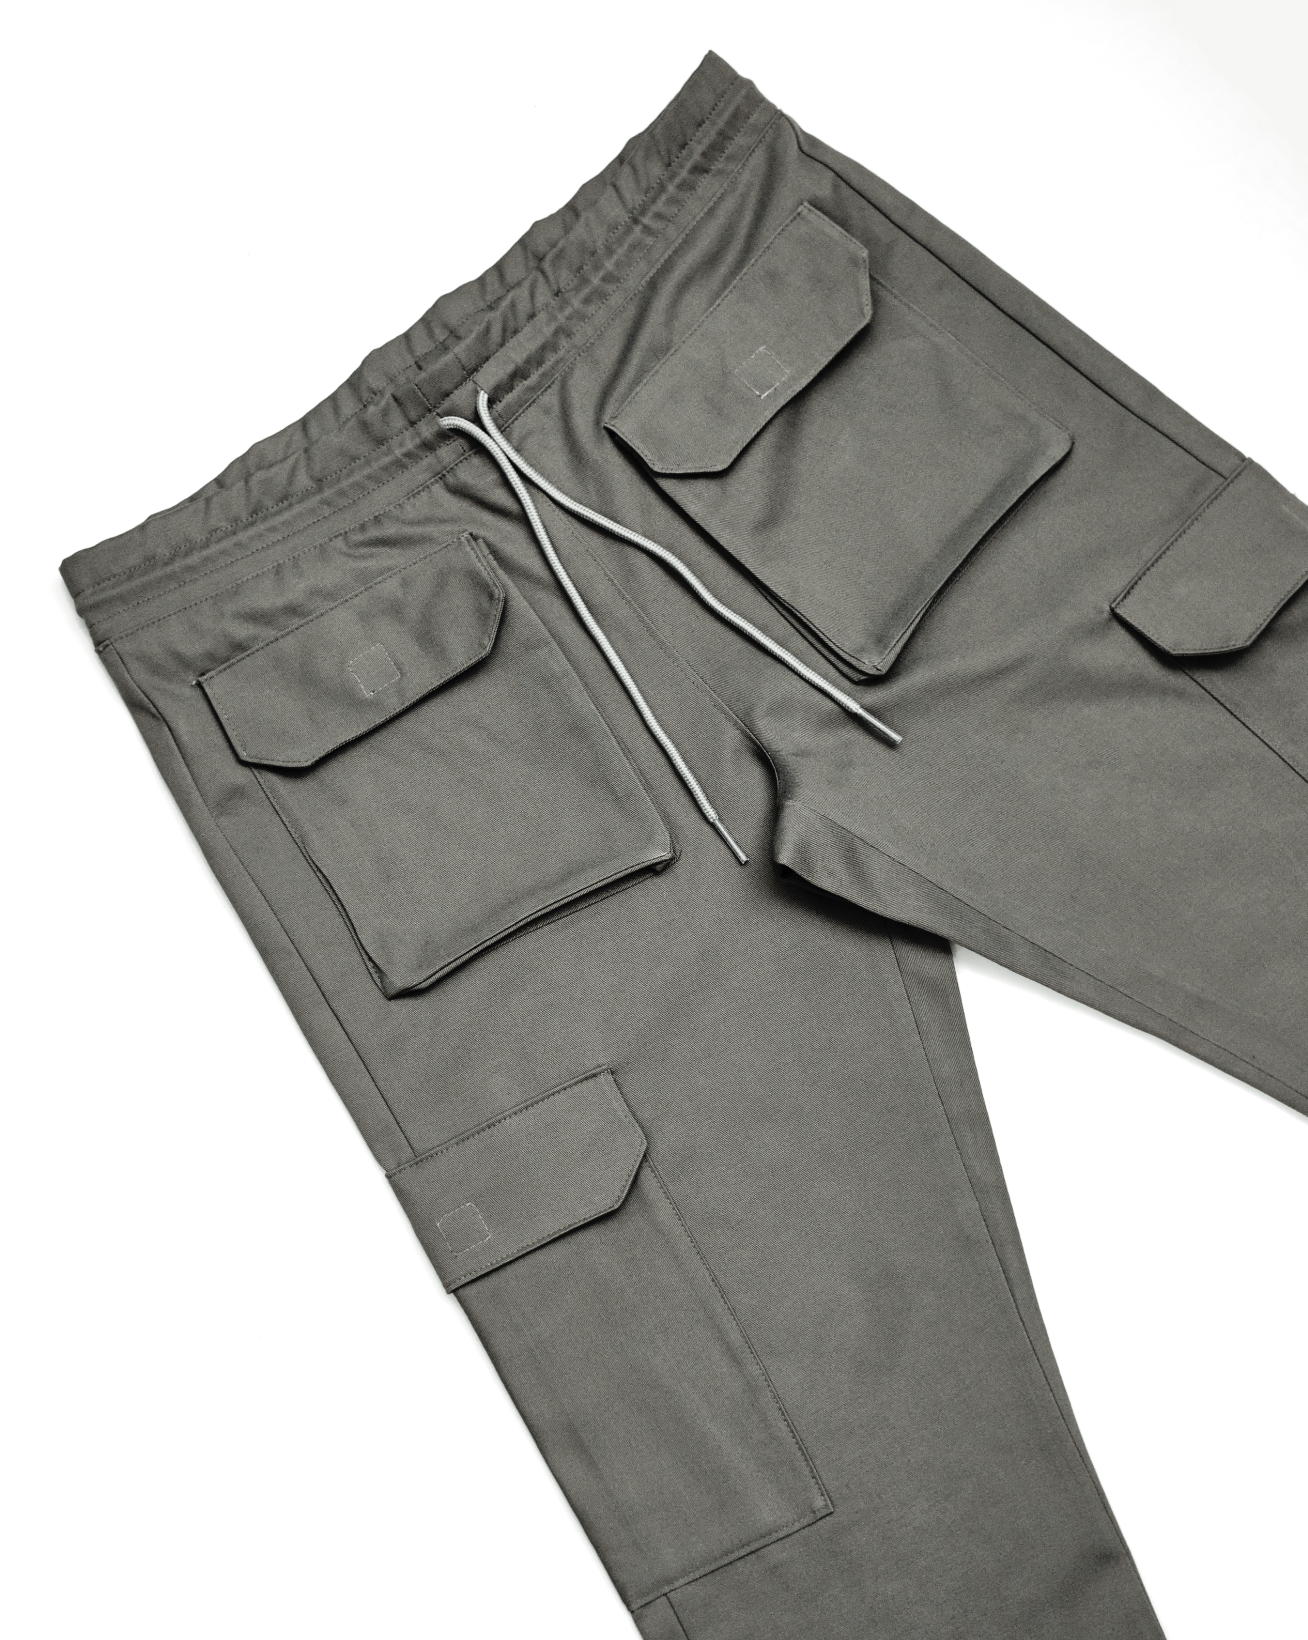 The Simple Cargo Pant